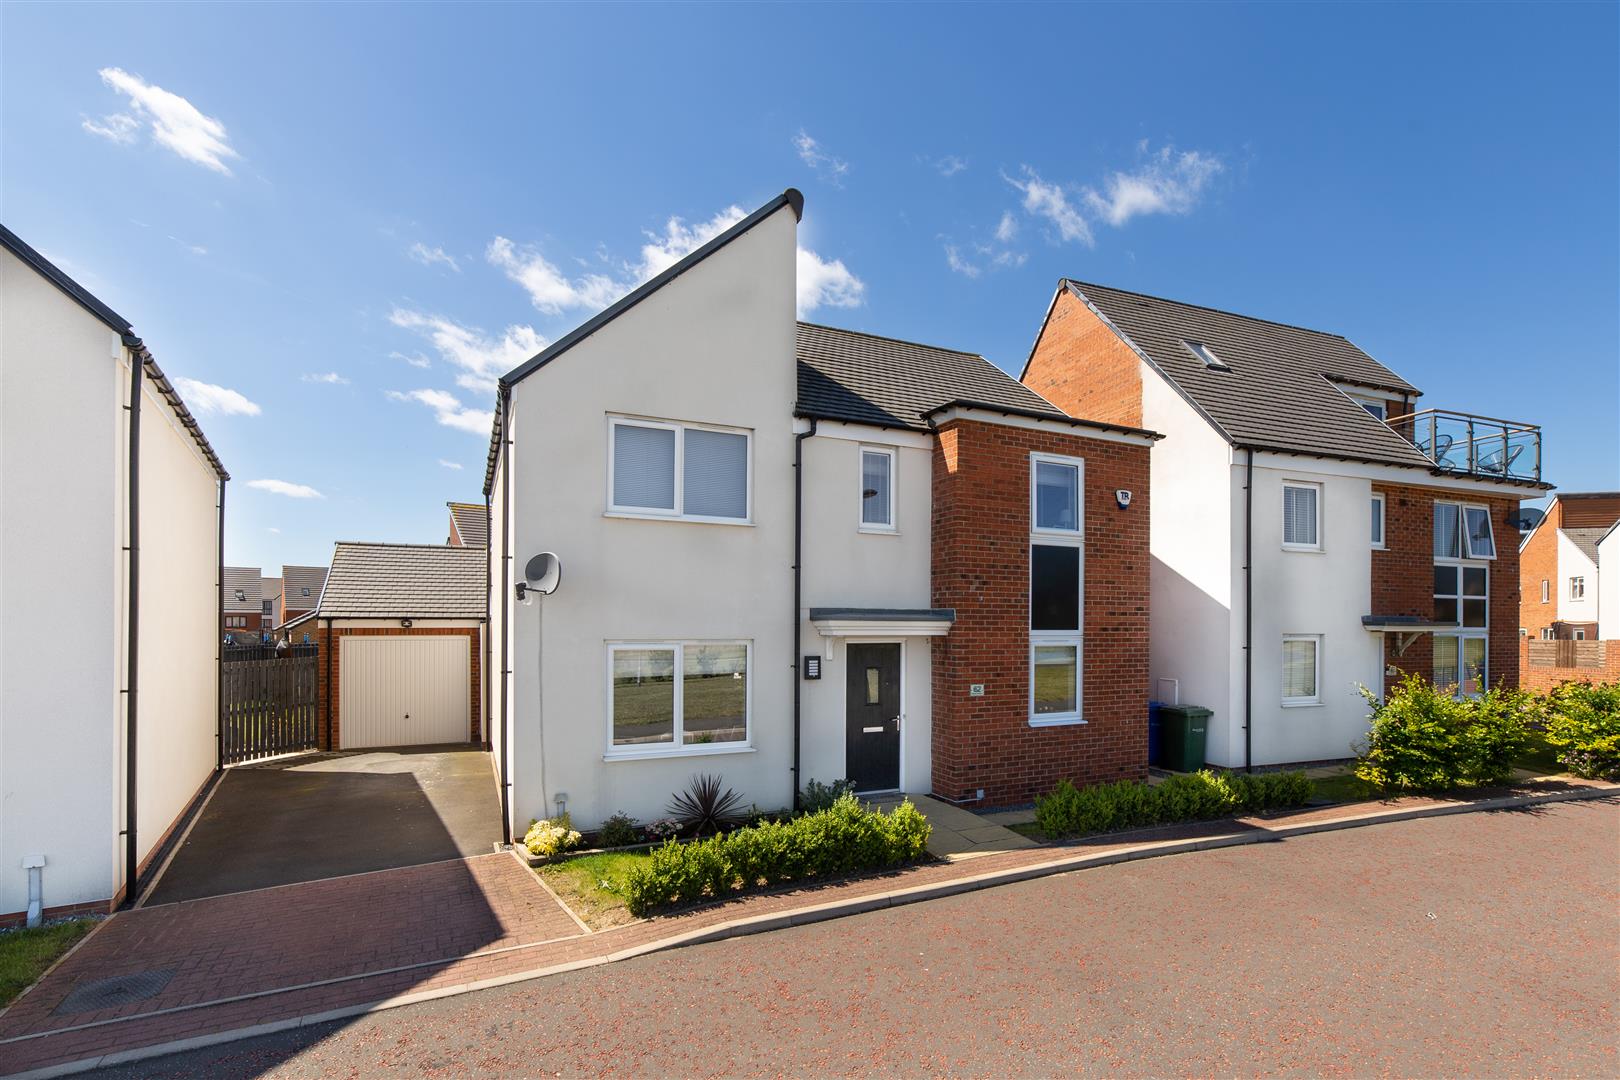 4 bed detached house for sale in Bridget Gardens, Great Park - Property Image 1